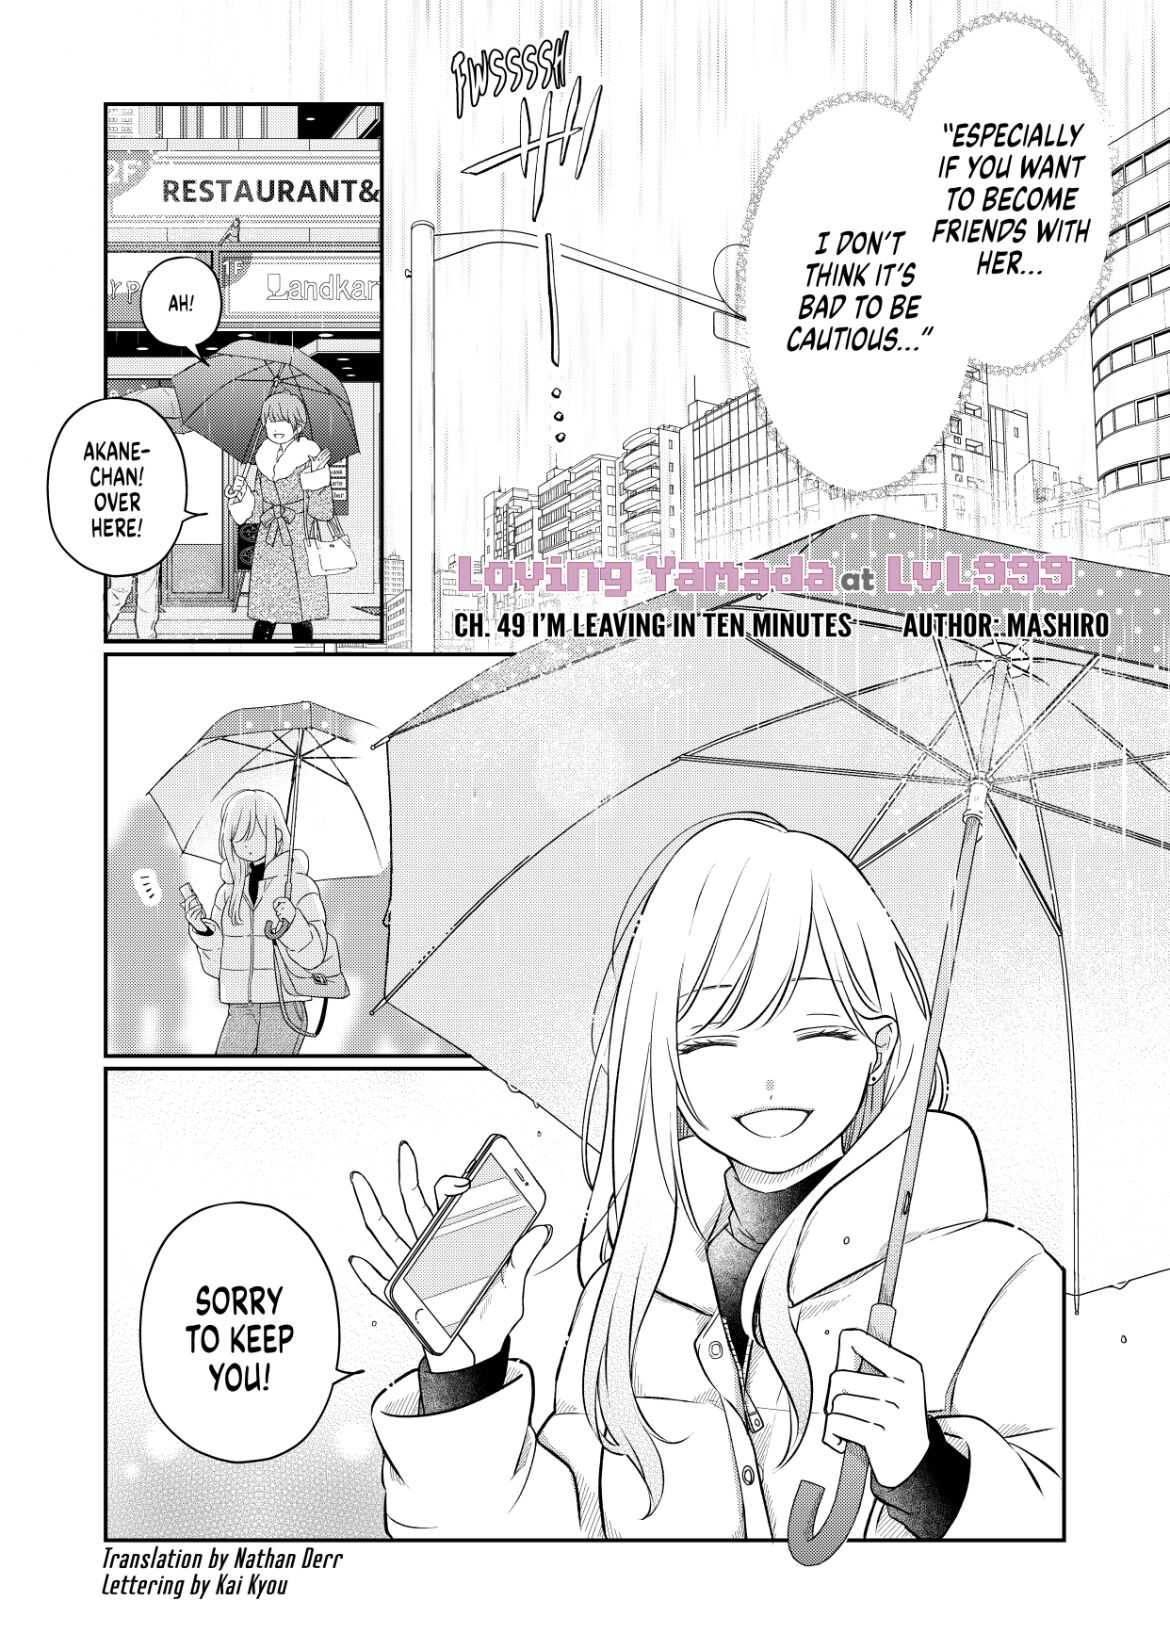 Chapter 67, My Love Story with Yamada-kun at Lv999